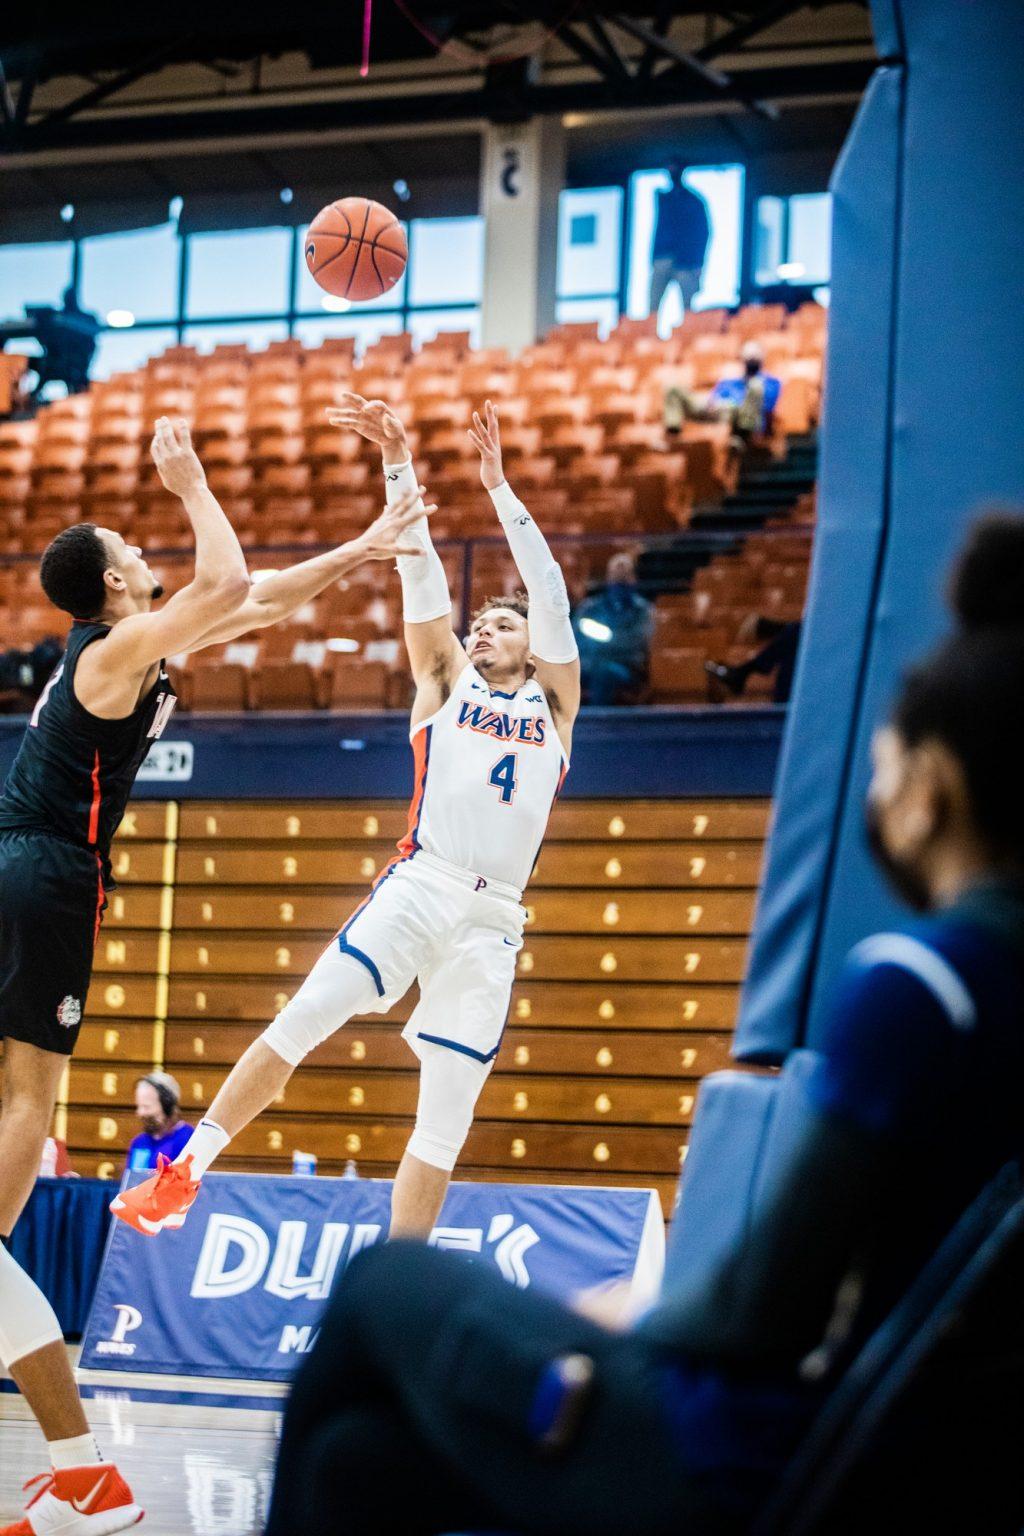 Pepperdine senior point guard Colbey Ross attempts a fadeway jump shot over Gonzaga's Jalen Suggs during the first half Saturday at Firestone Fieldhouse. Ross finished with 16 points in the game, surpassing 2,000 points in his Pepperdine career along the way.